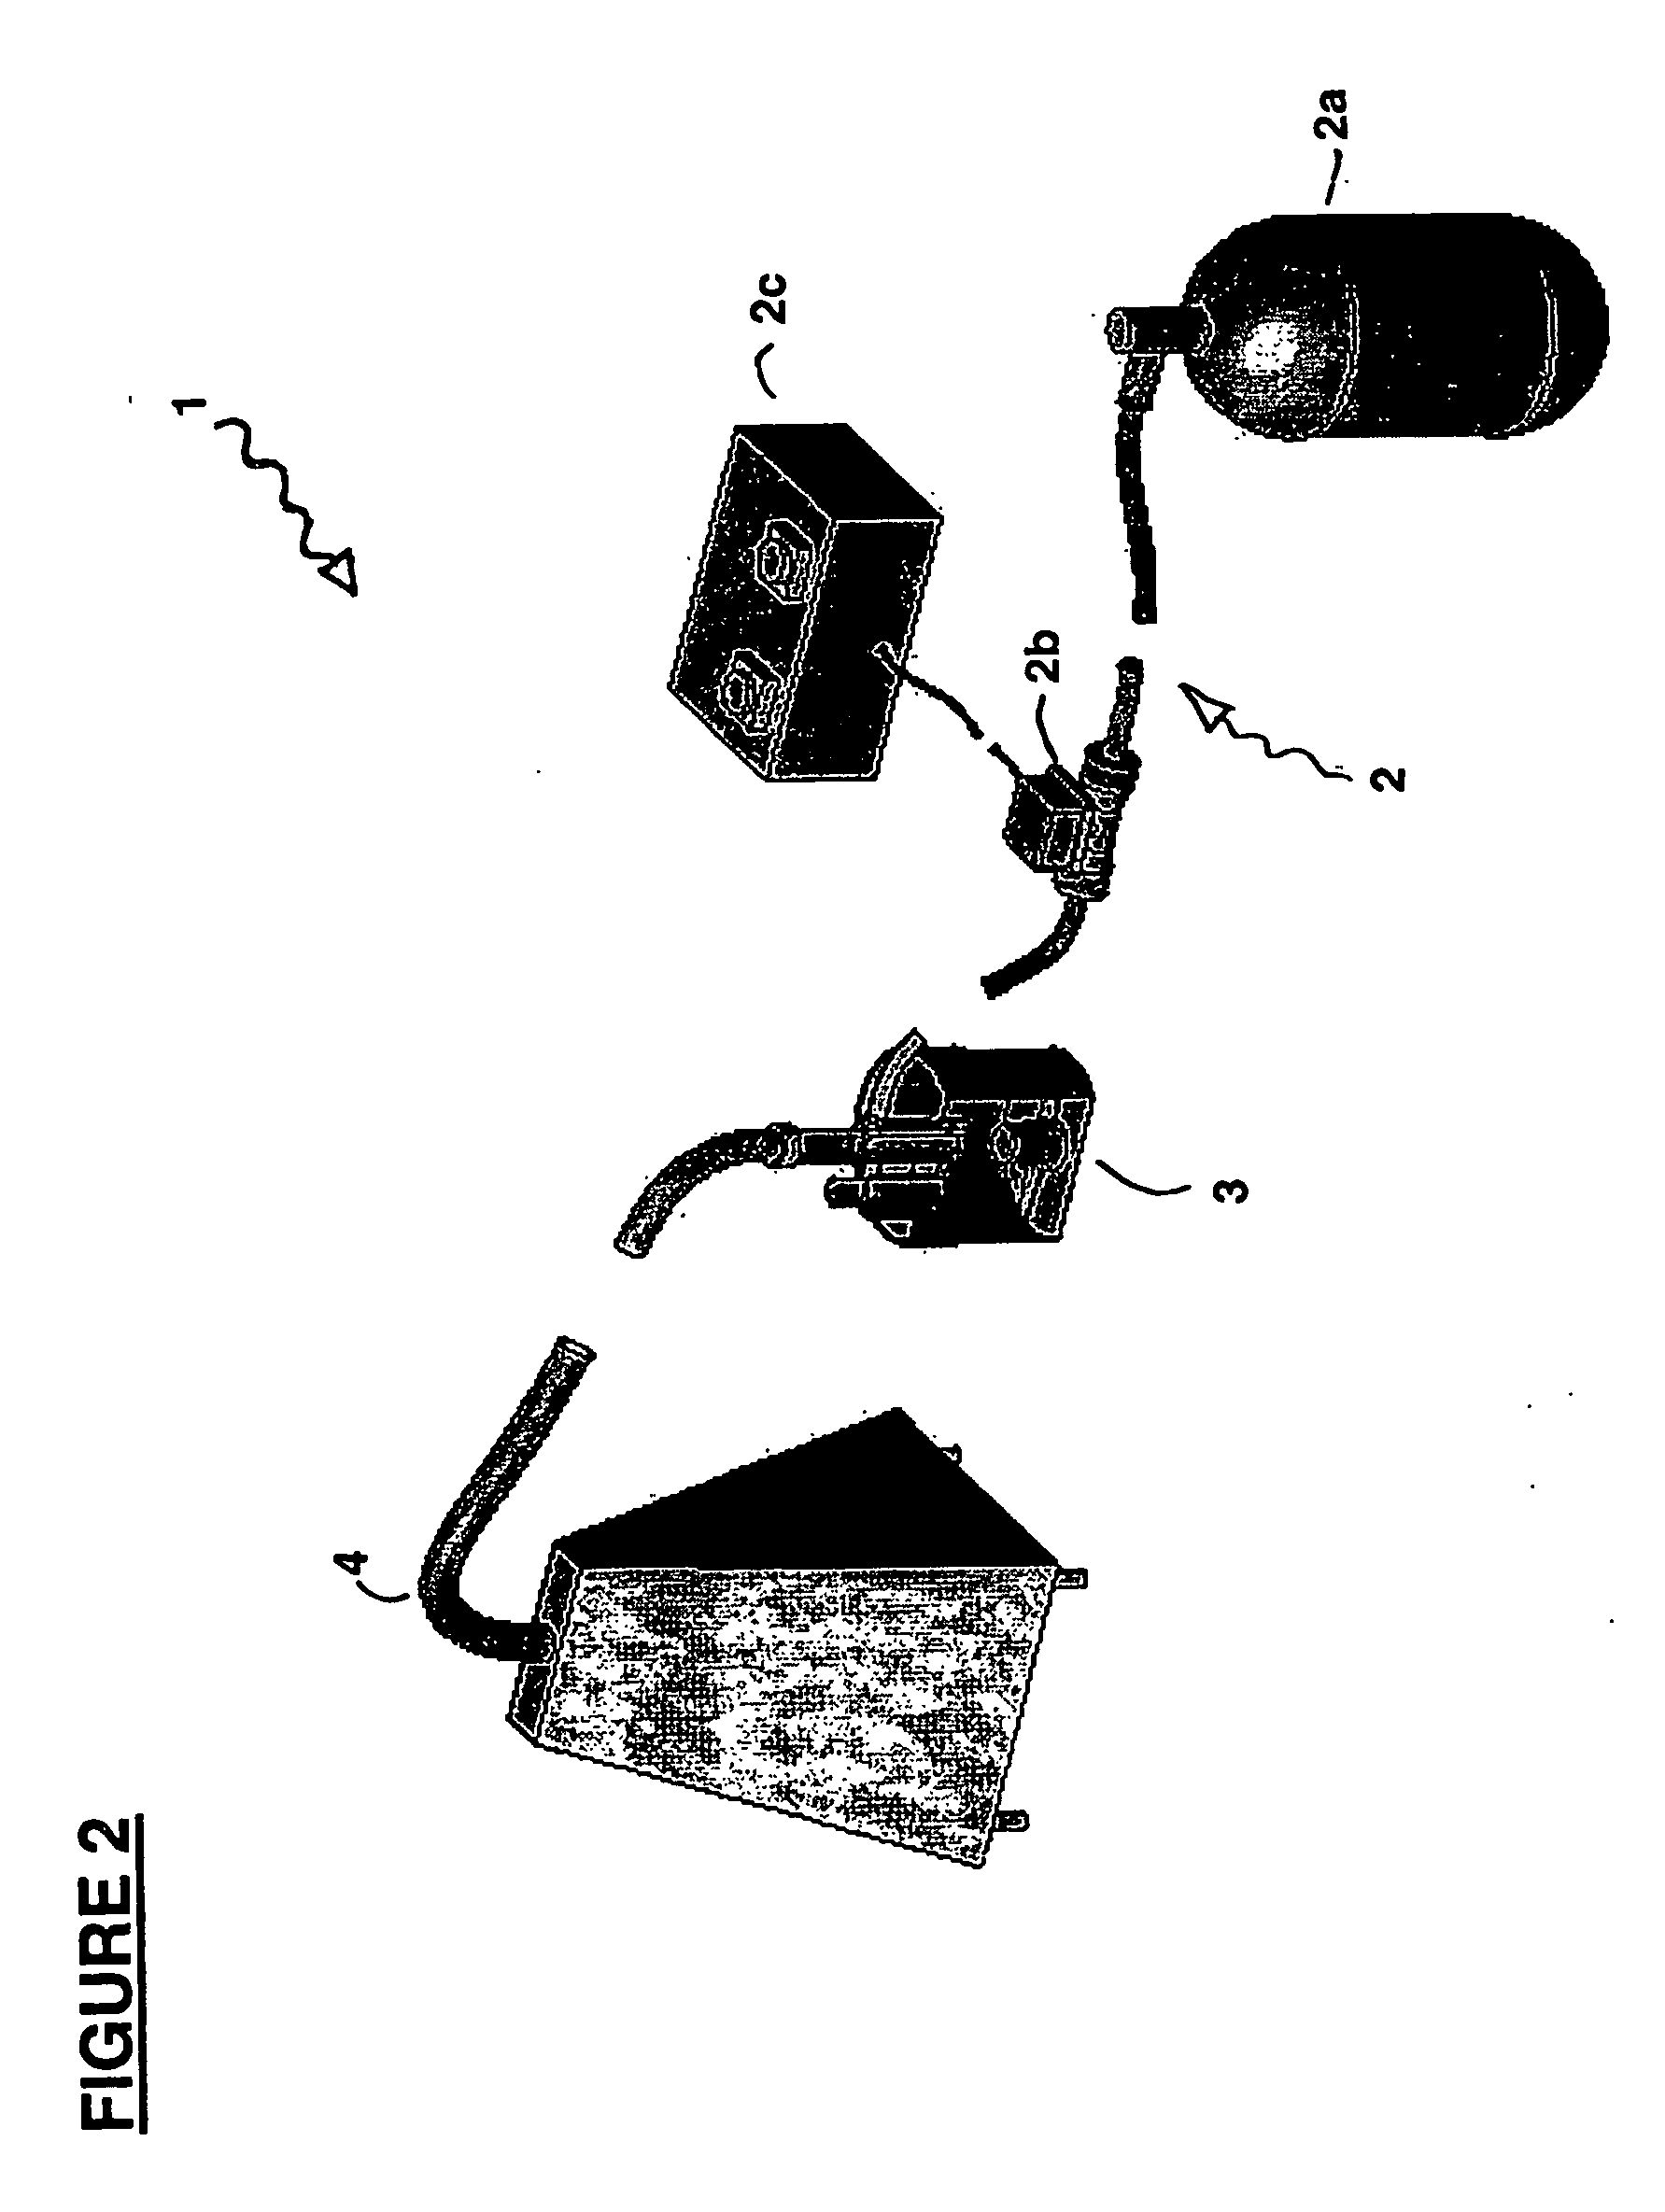 Sample preparation method including cooling and cutting